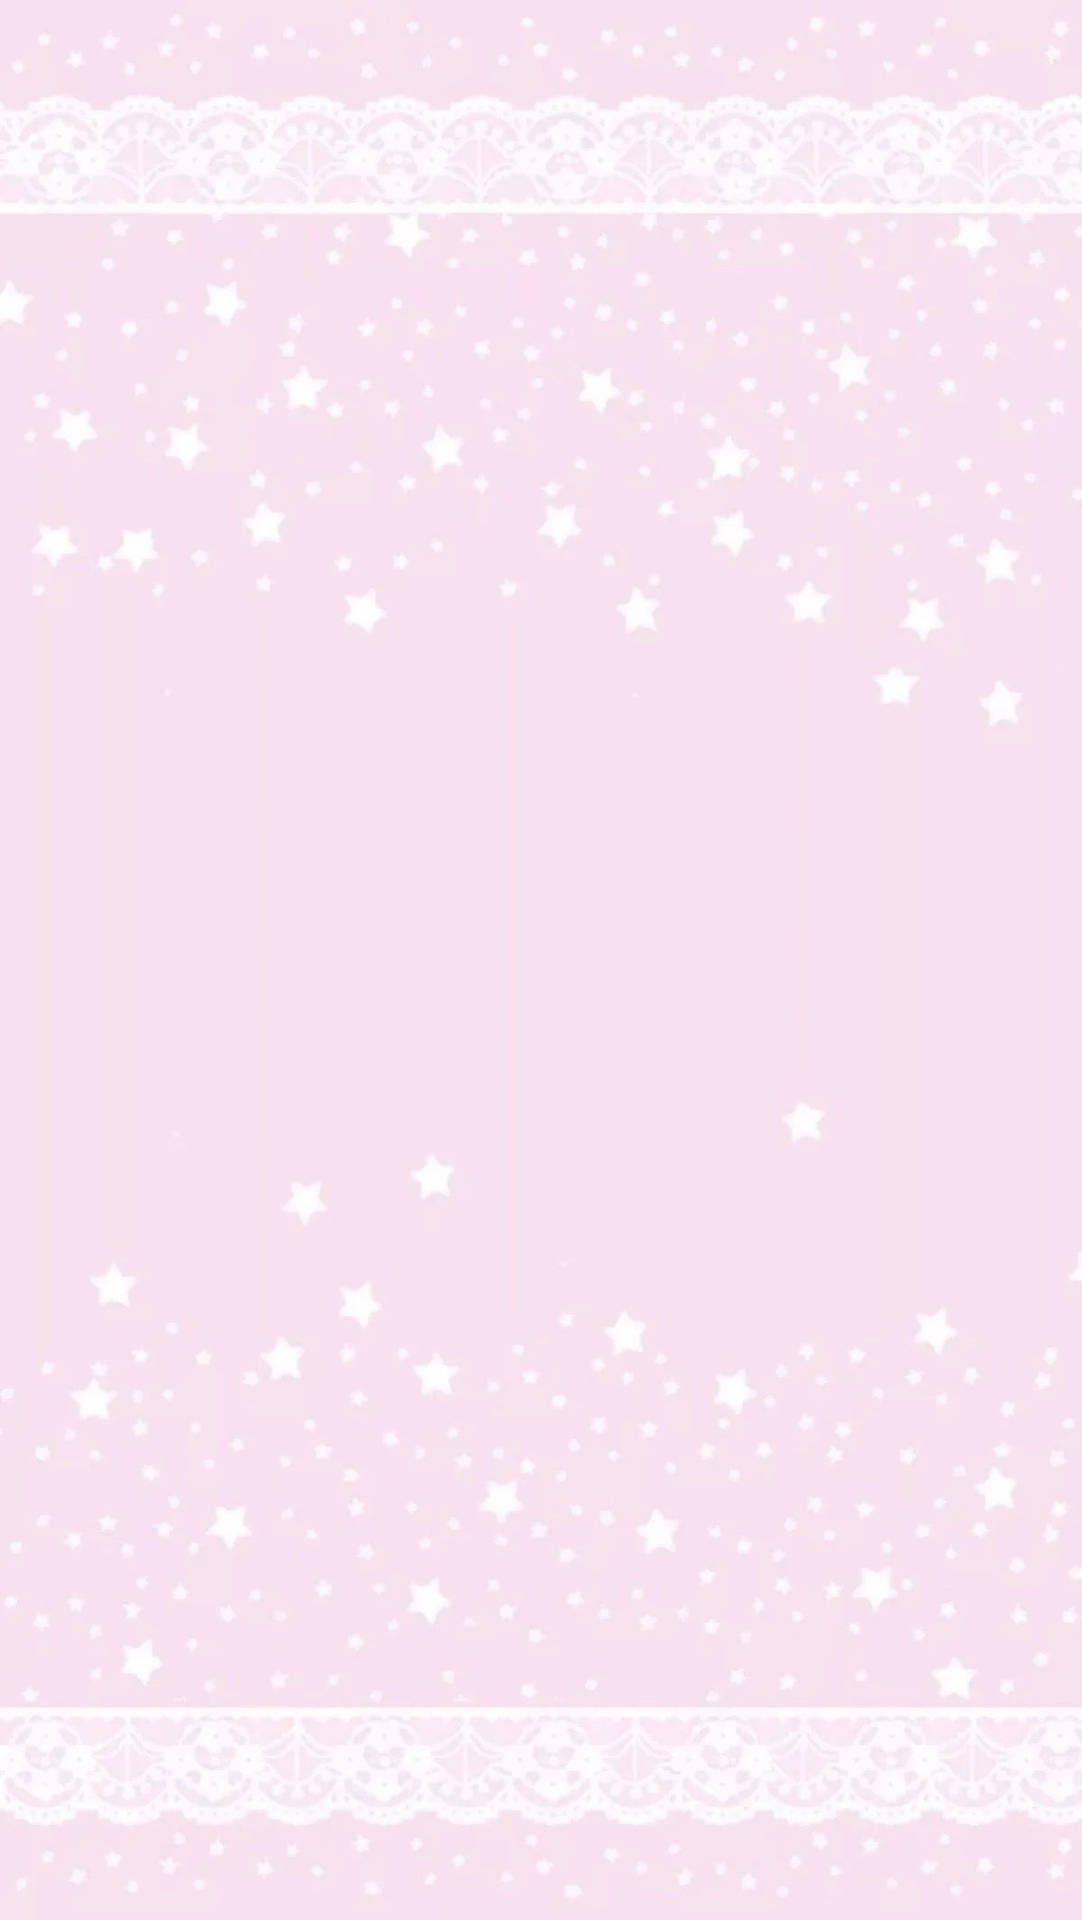 Kawaii Pink Wallpaper With Stars And Borders Background